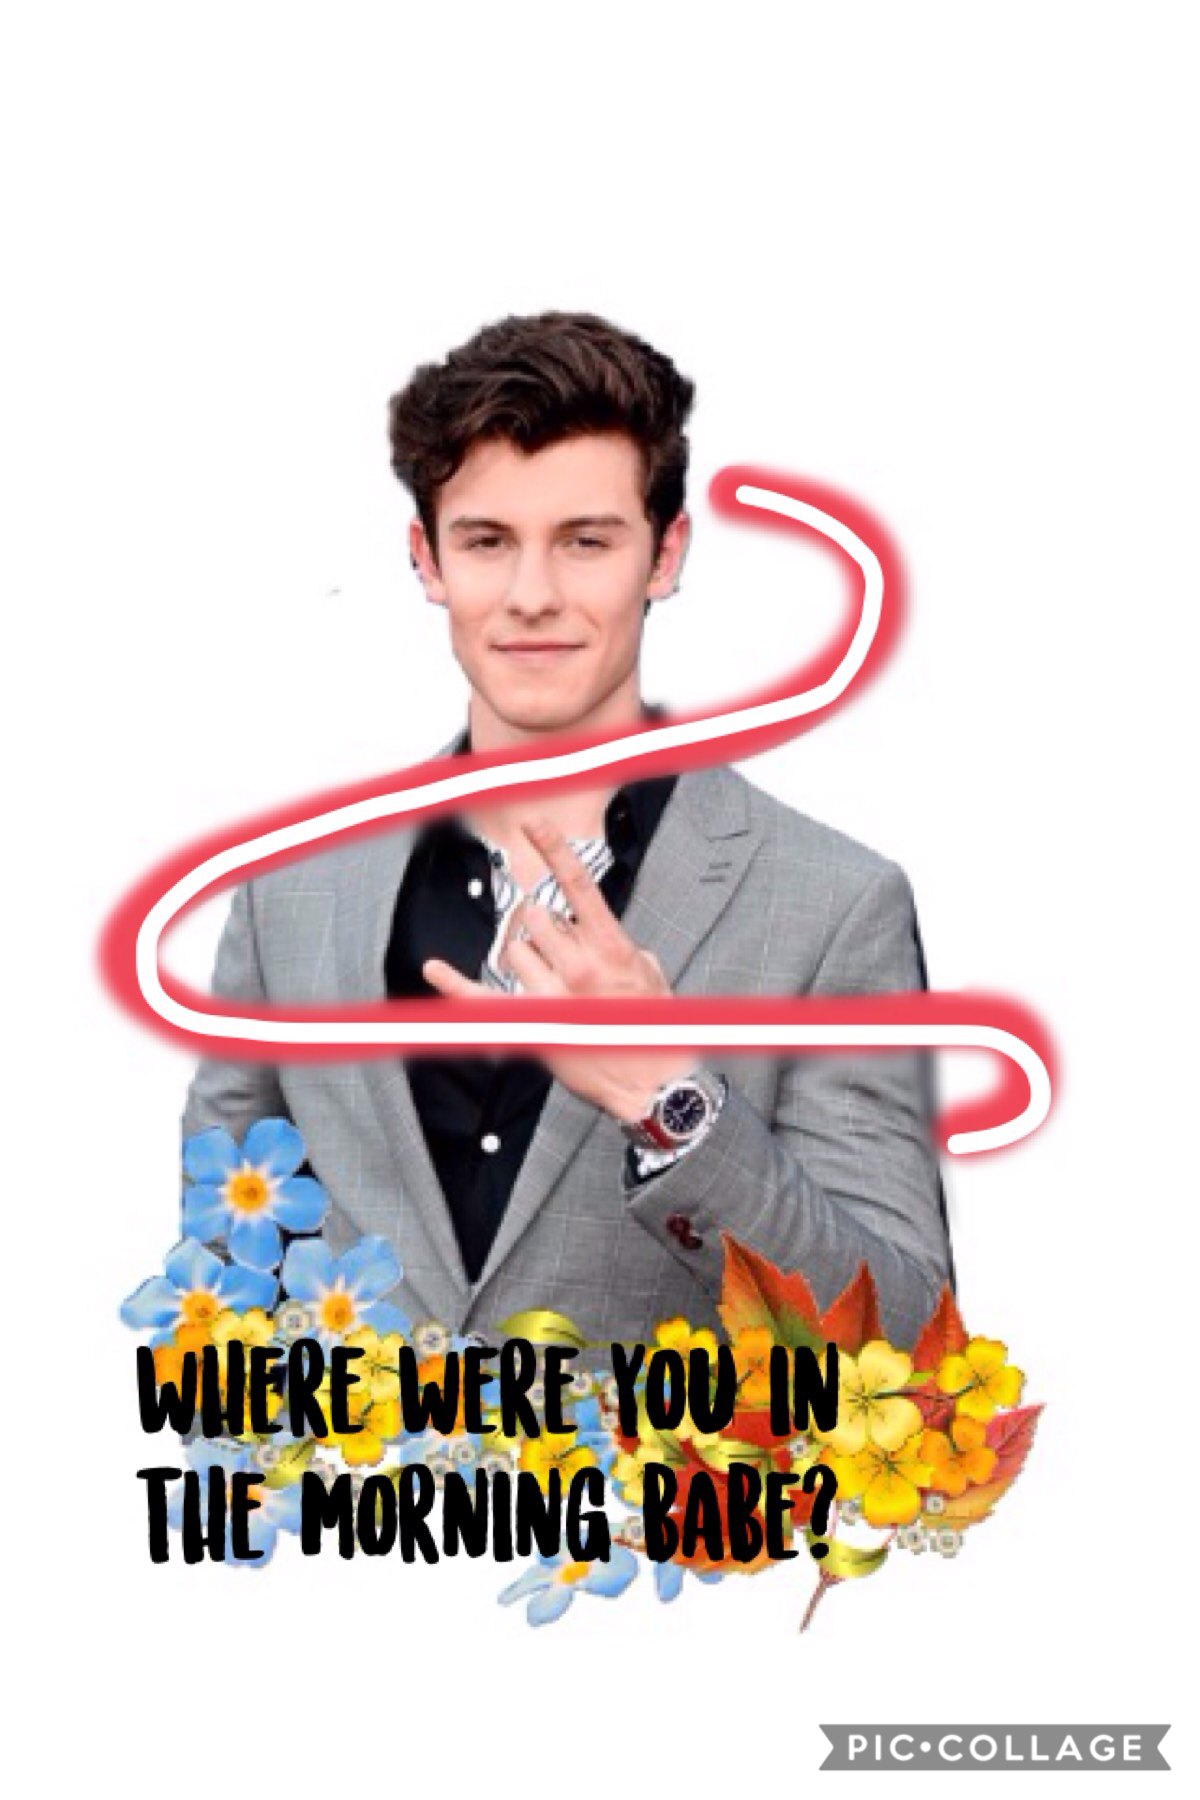 TAP!
haha i was just gonna use this as a tutorial example but it turned out better than i thought so i just added some text lololol. 
#shawnmendes 
#mendesarmy
#wherewereyouinthemorningbabe
#lololol
#💖